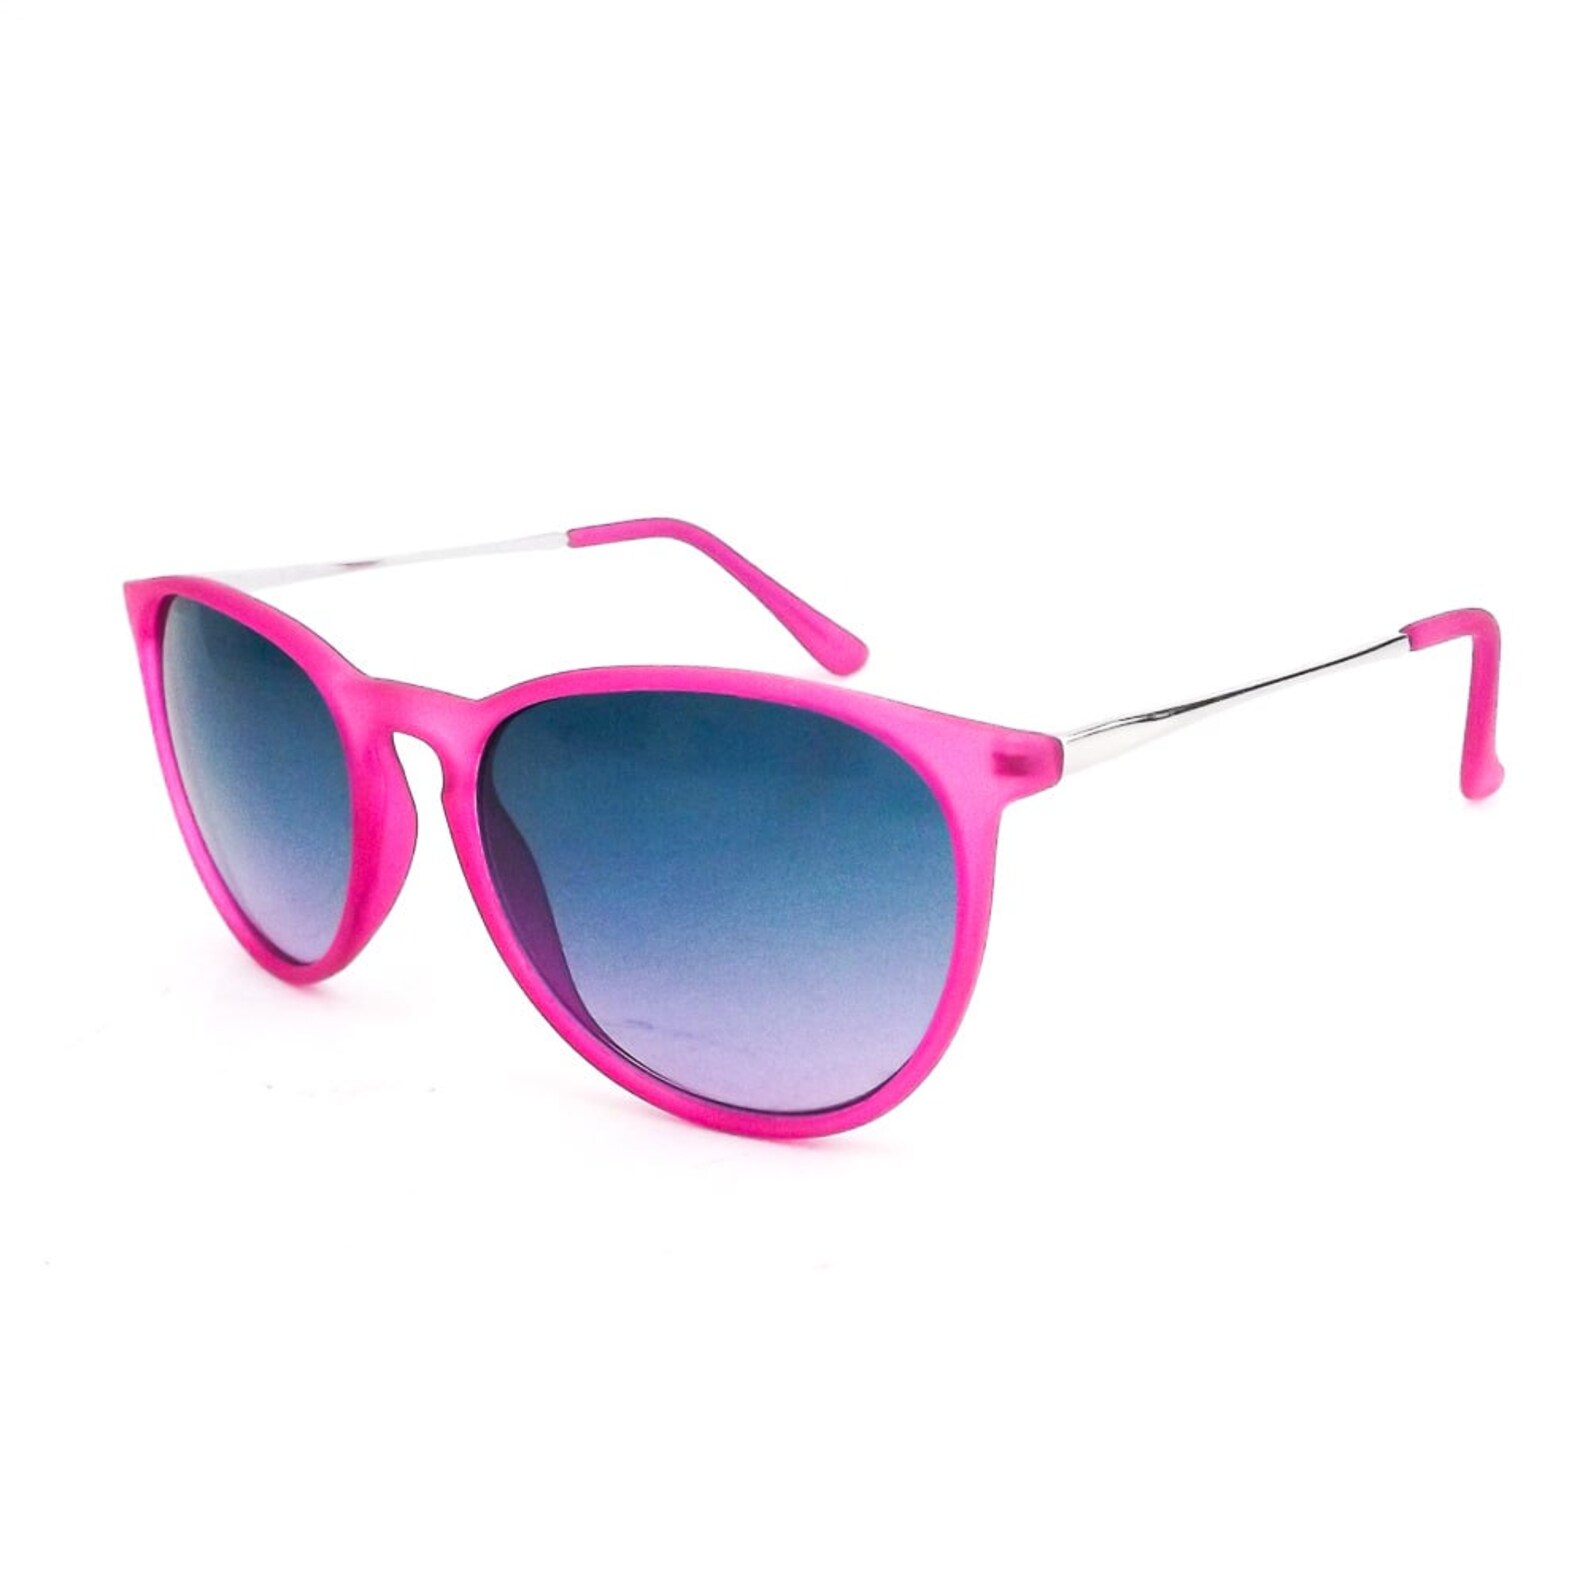 1990s Vintage Sunglasses Clear Hot Pink Sunglasses Blue Tinted - Etsy